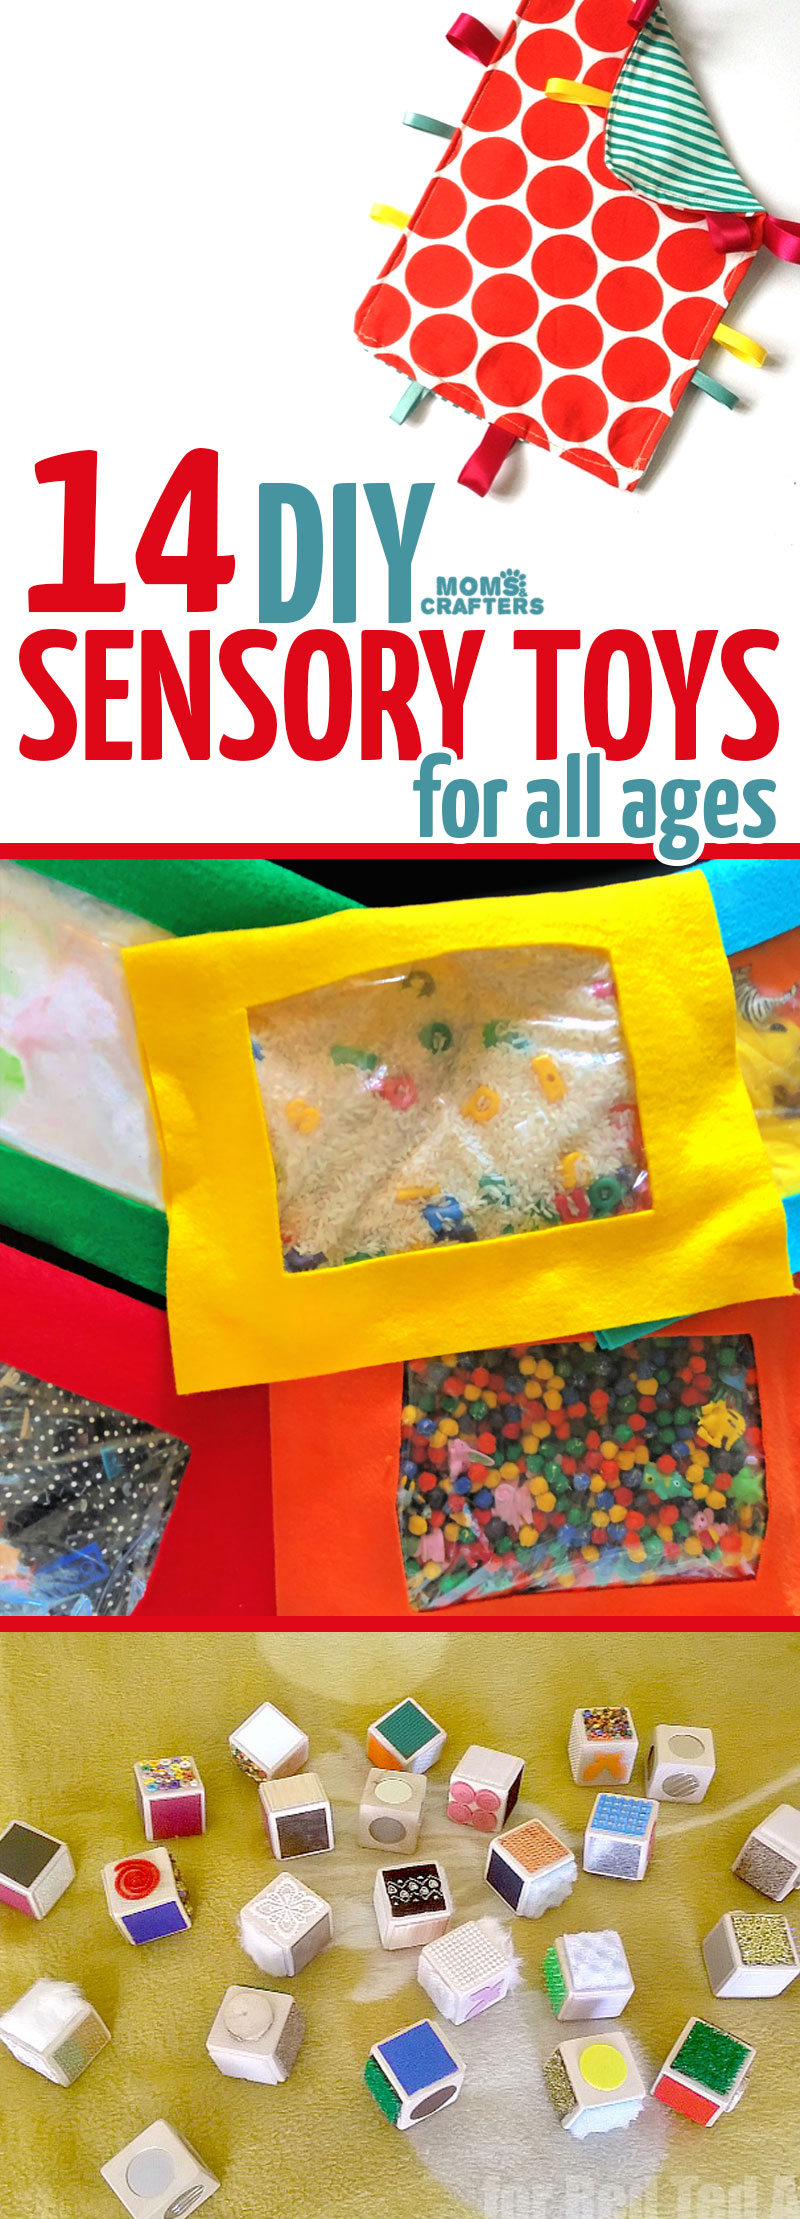 Click for 14 DIY sensory toys to make for your kids! these cool toy crafts are perfect for kids with SPD - sensory processing disorder, ASD - autism, or anyone who likes additional sensory input. #spd #autism #craftymom